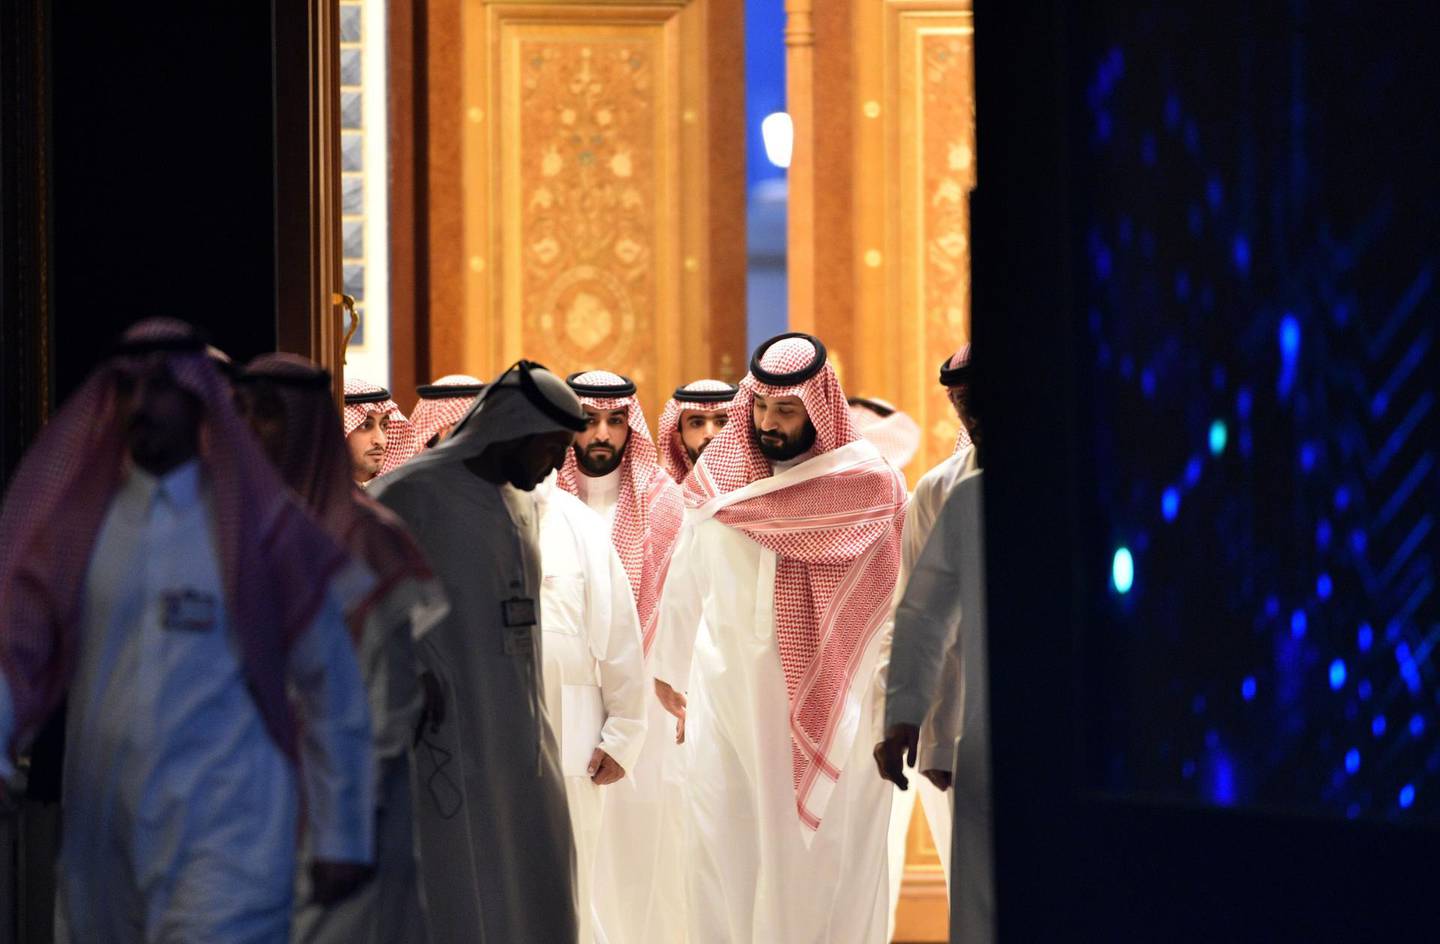 Saudi Crown Prince Mohammed bin Salman (C) arrives to attend a session during the Future Investment Initiative (FII) conference in the capital Riyadh on October 24, 2018. Saudi Arabia is hosting the key investment summit overshadowed by the killing of critic Jamal Khashoggi that has prompted a wave of policymakers and corporate giants to withdraw. / AFP / FAYEZ NURELDINE
